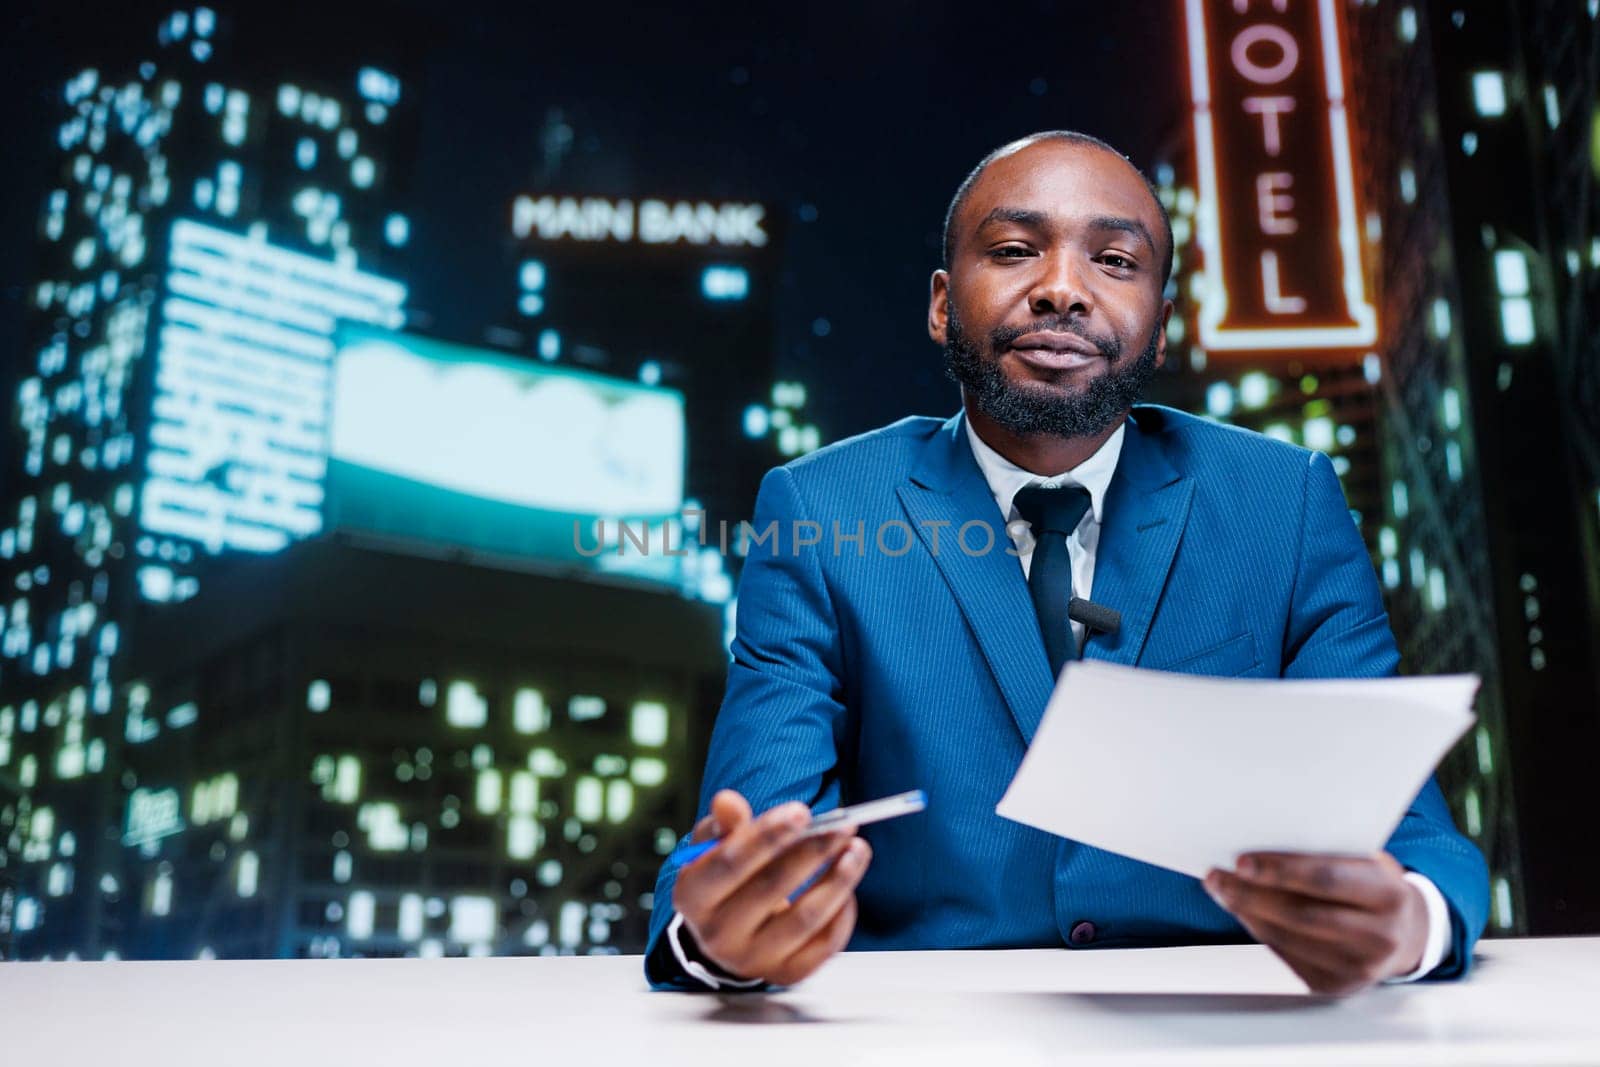 African american host presenting news during late night show entertainment segment, reading international headlines of the day. Man journalist addressing breaking news topics of latest events.